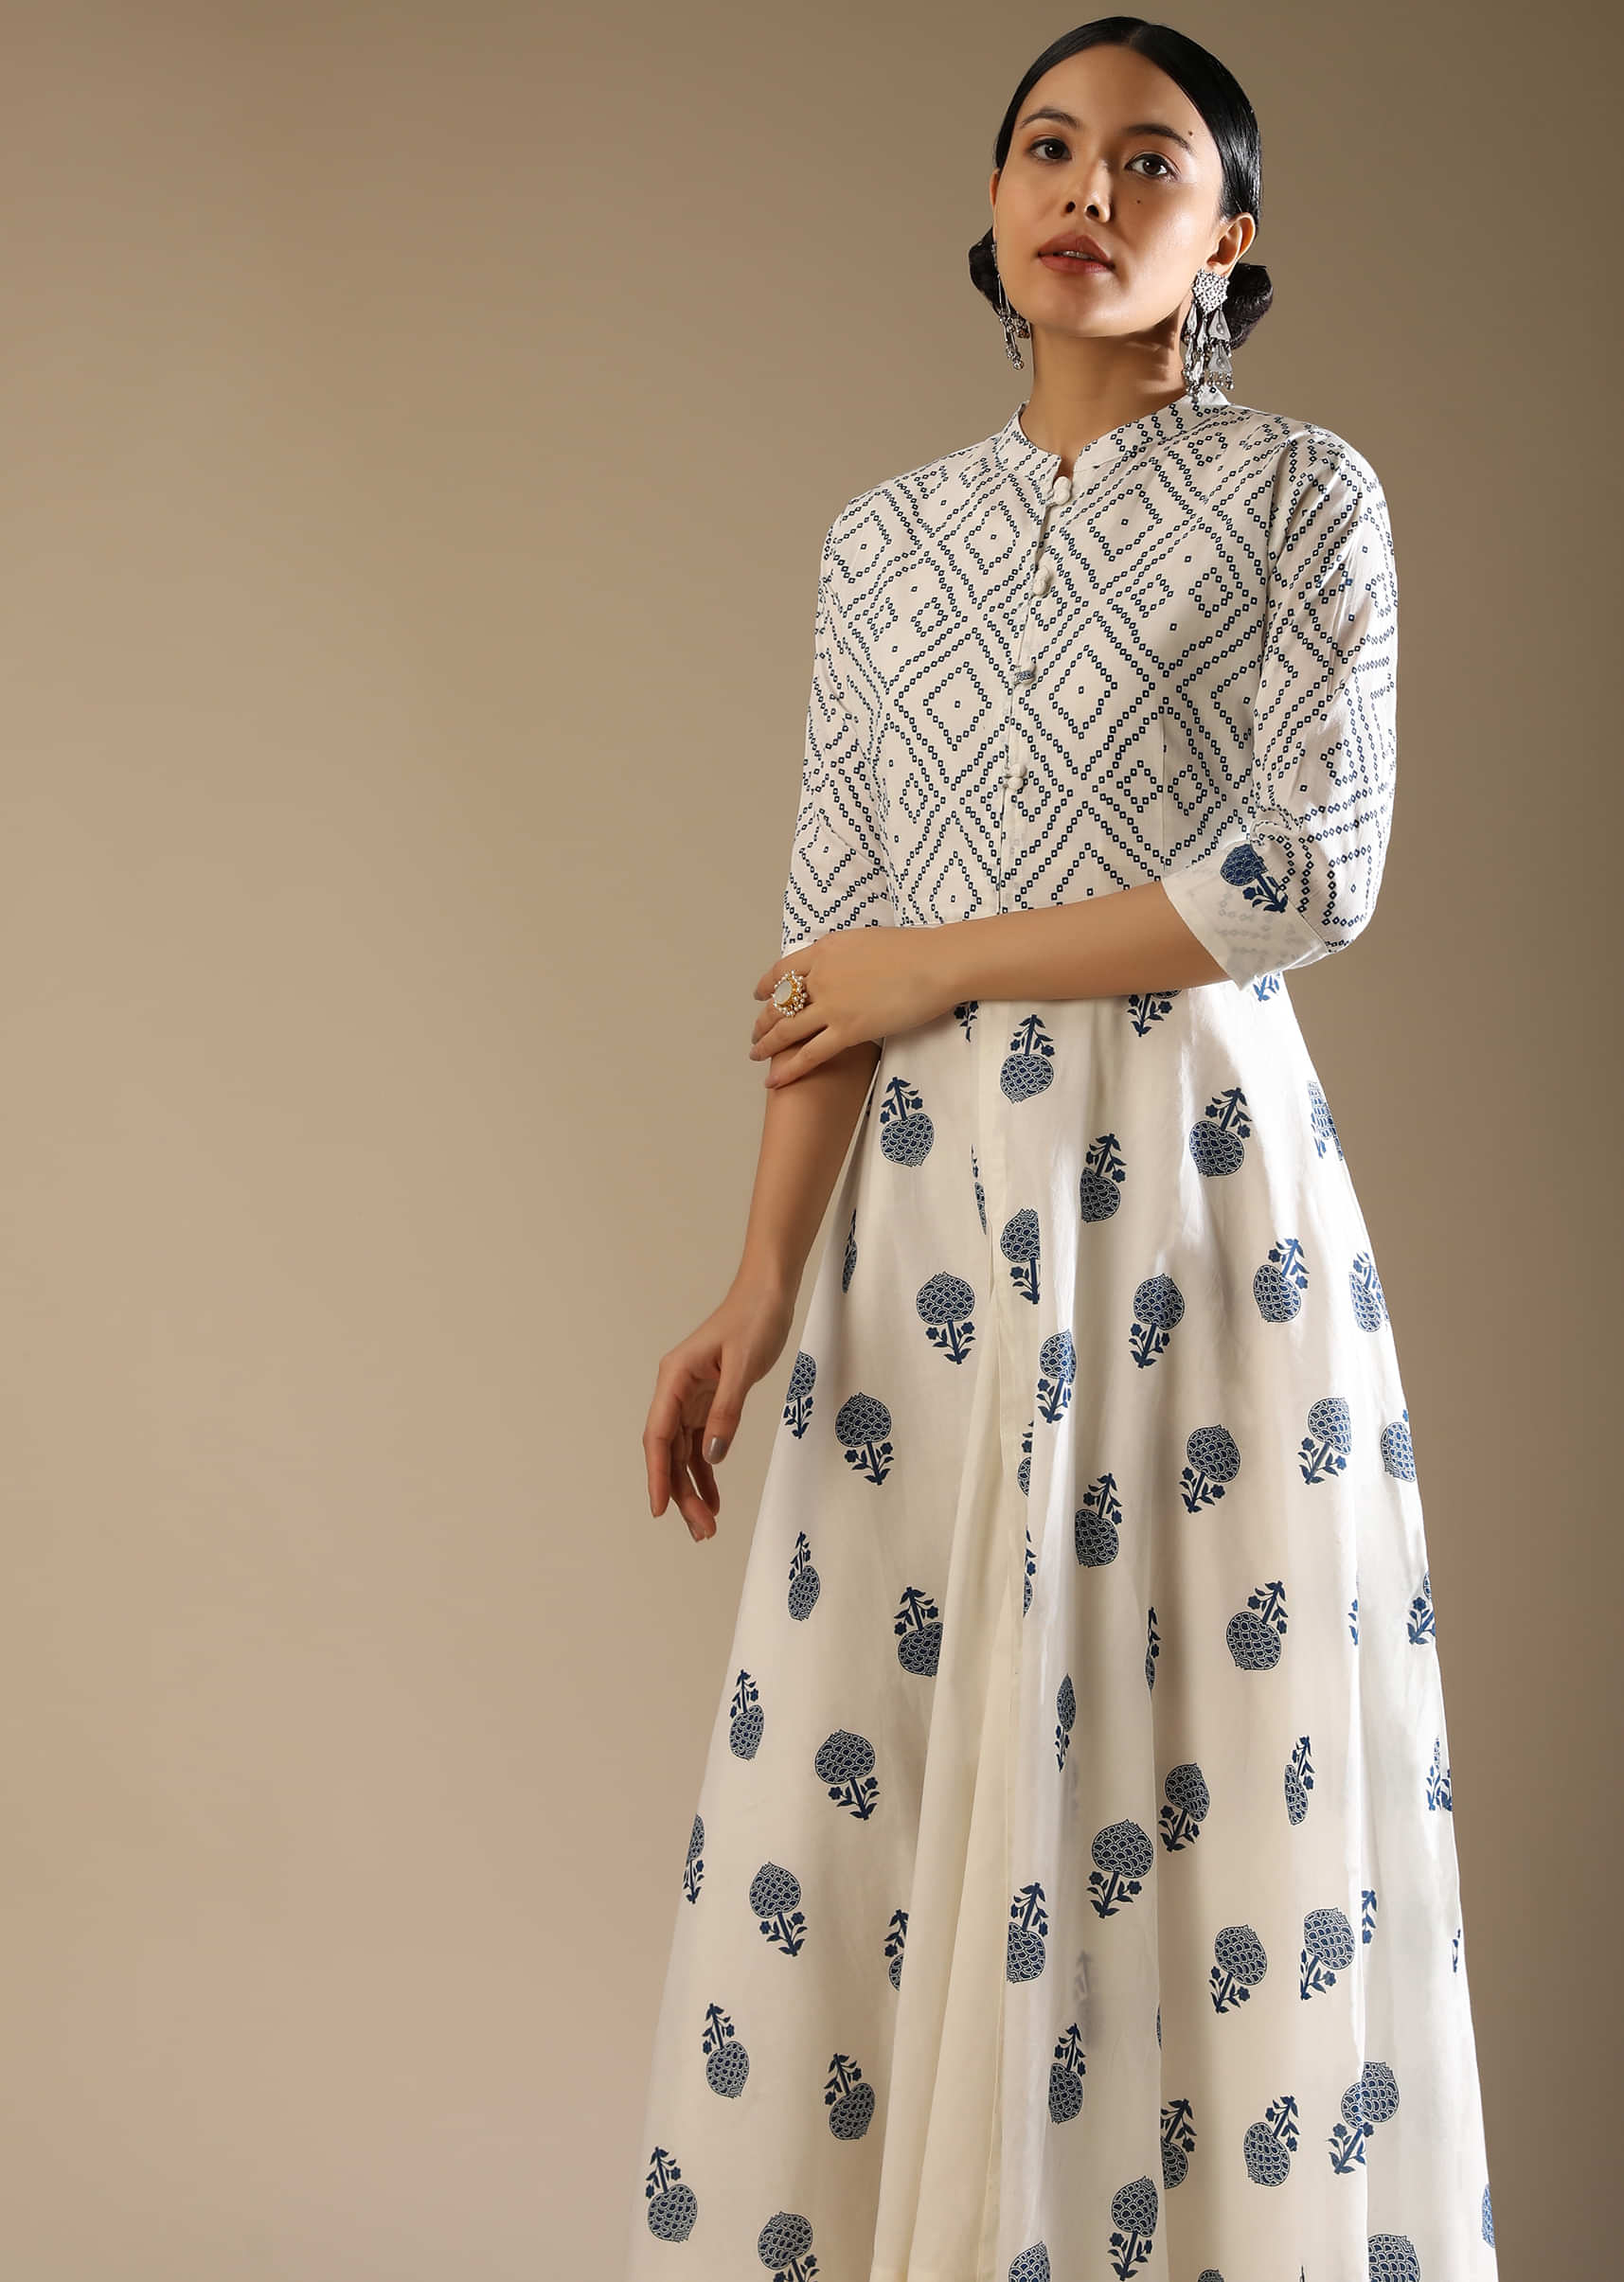 White A Line Front Slit Kurta Set In Cotton With Blue Printed Buttis And Geometric Motifs And Long Sleeveless Inner 